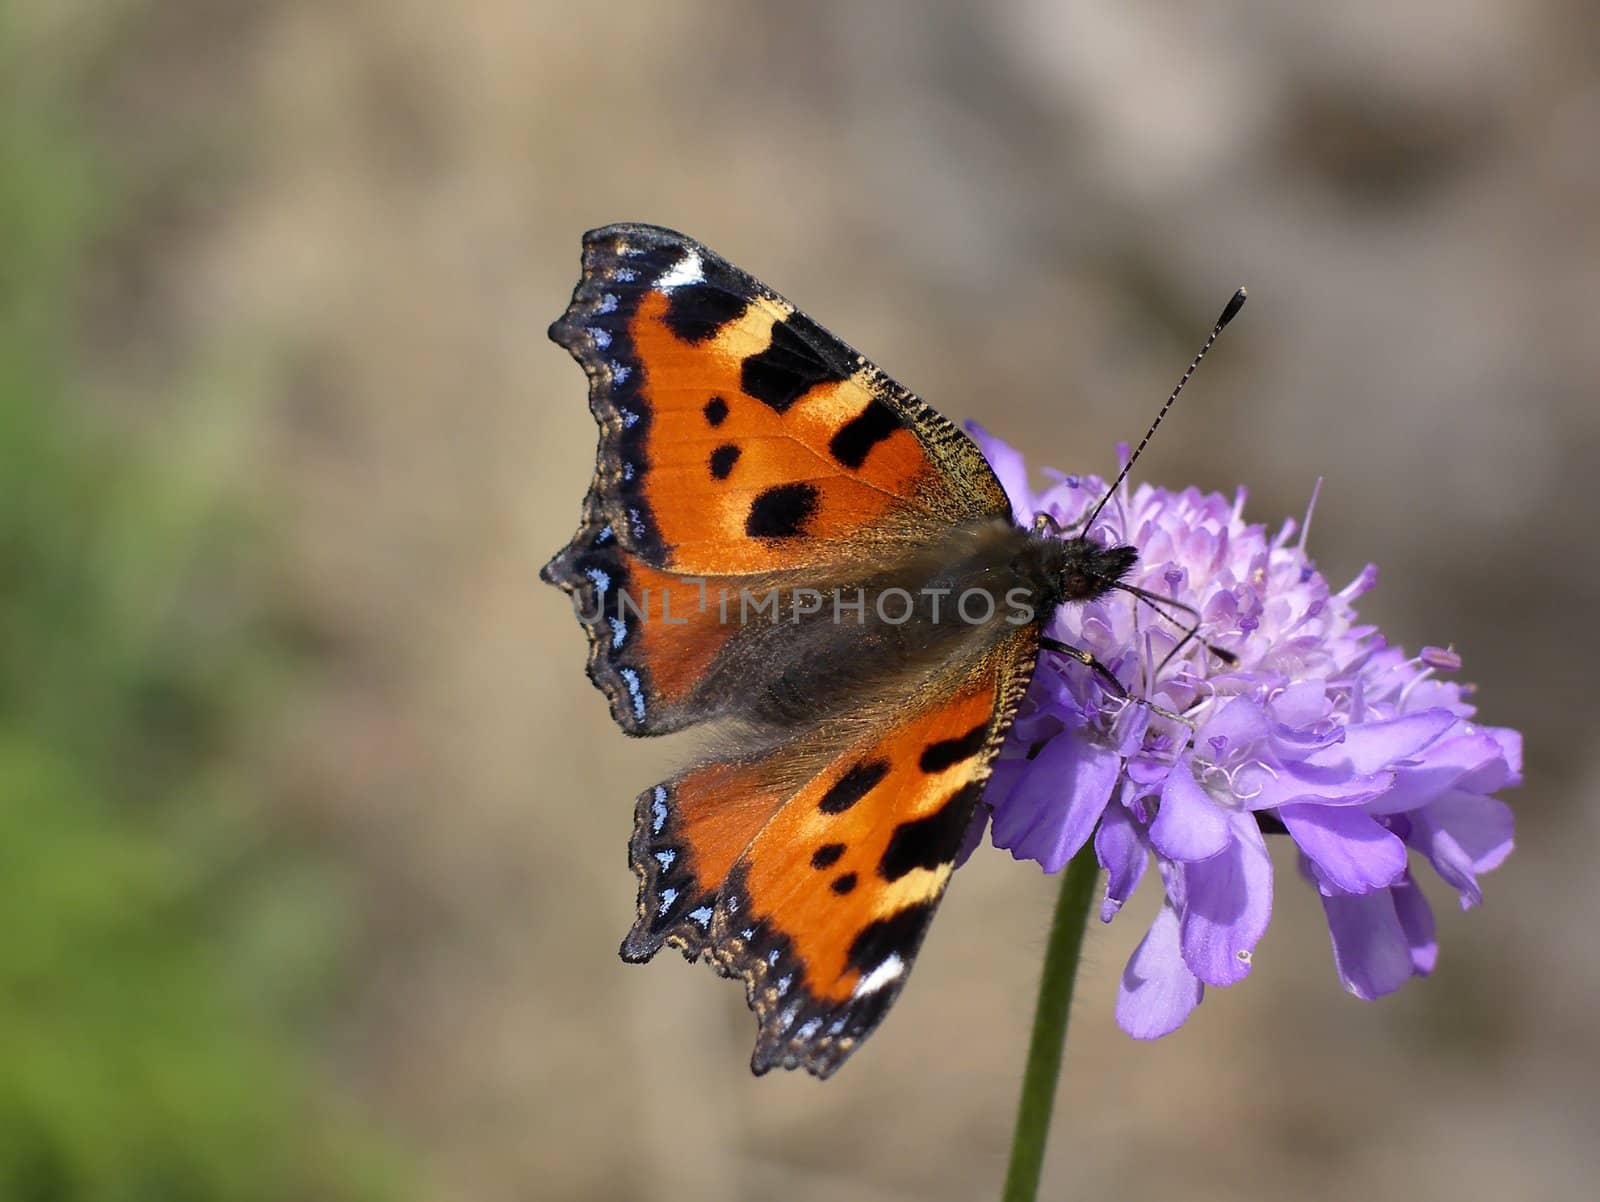 Close view of a butterfly sucking nectar on a flower (knautia arvensis)